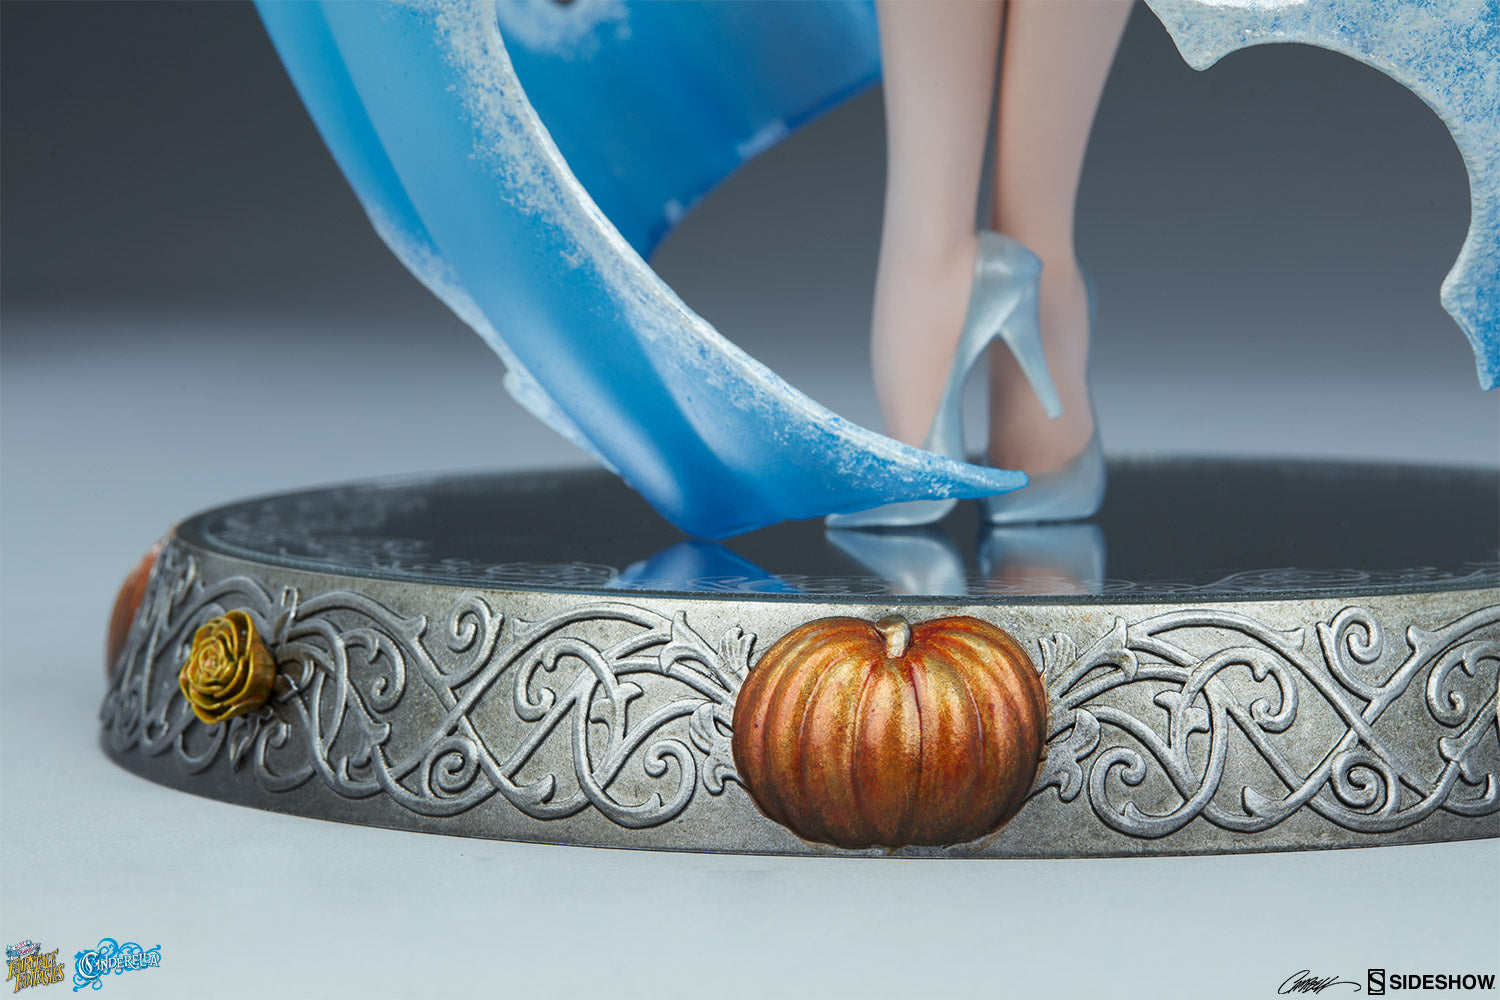 Sideshow Collectibles - J. Scott Campbell&#39;s Fairytale Fantasies Collection - Cinderella - Marvelous Toys